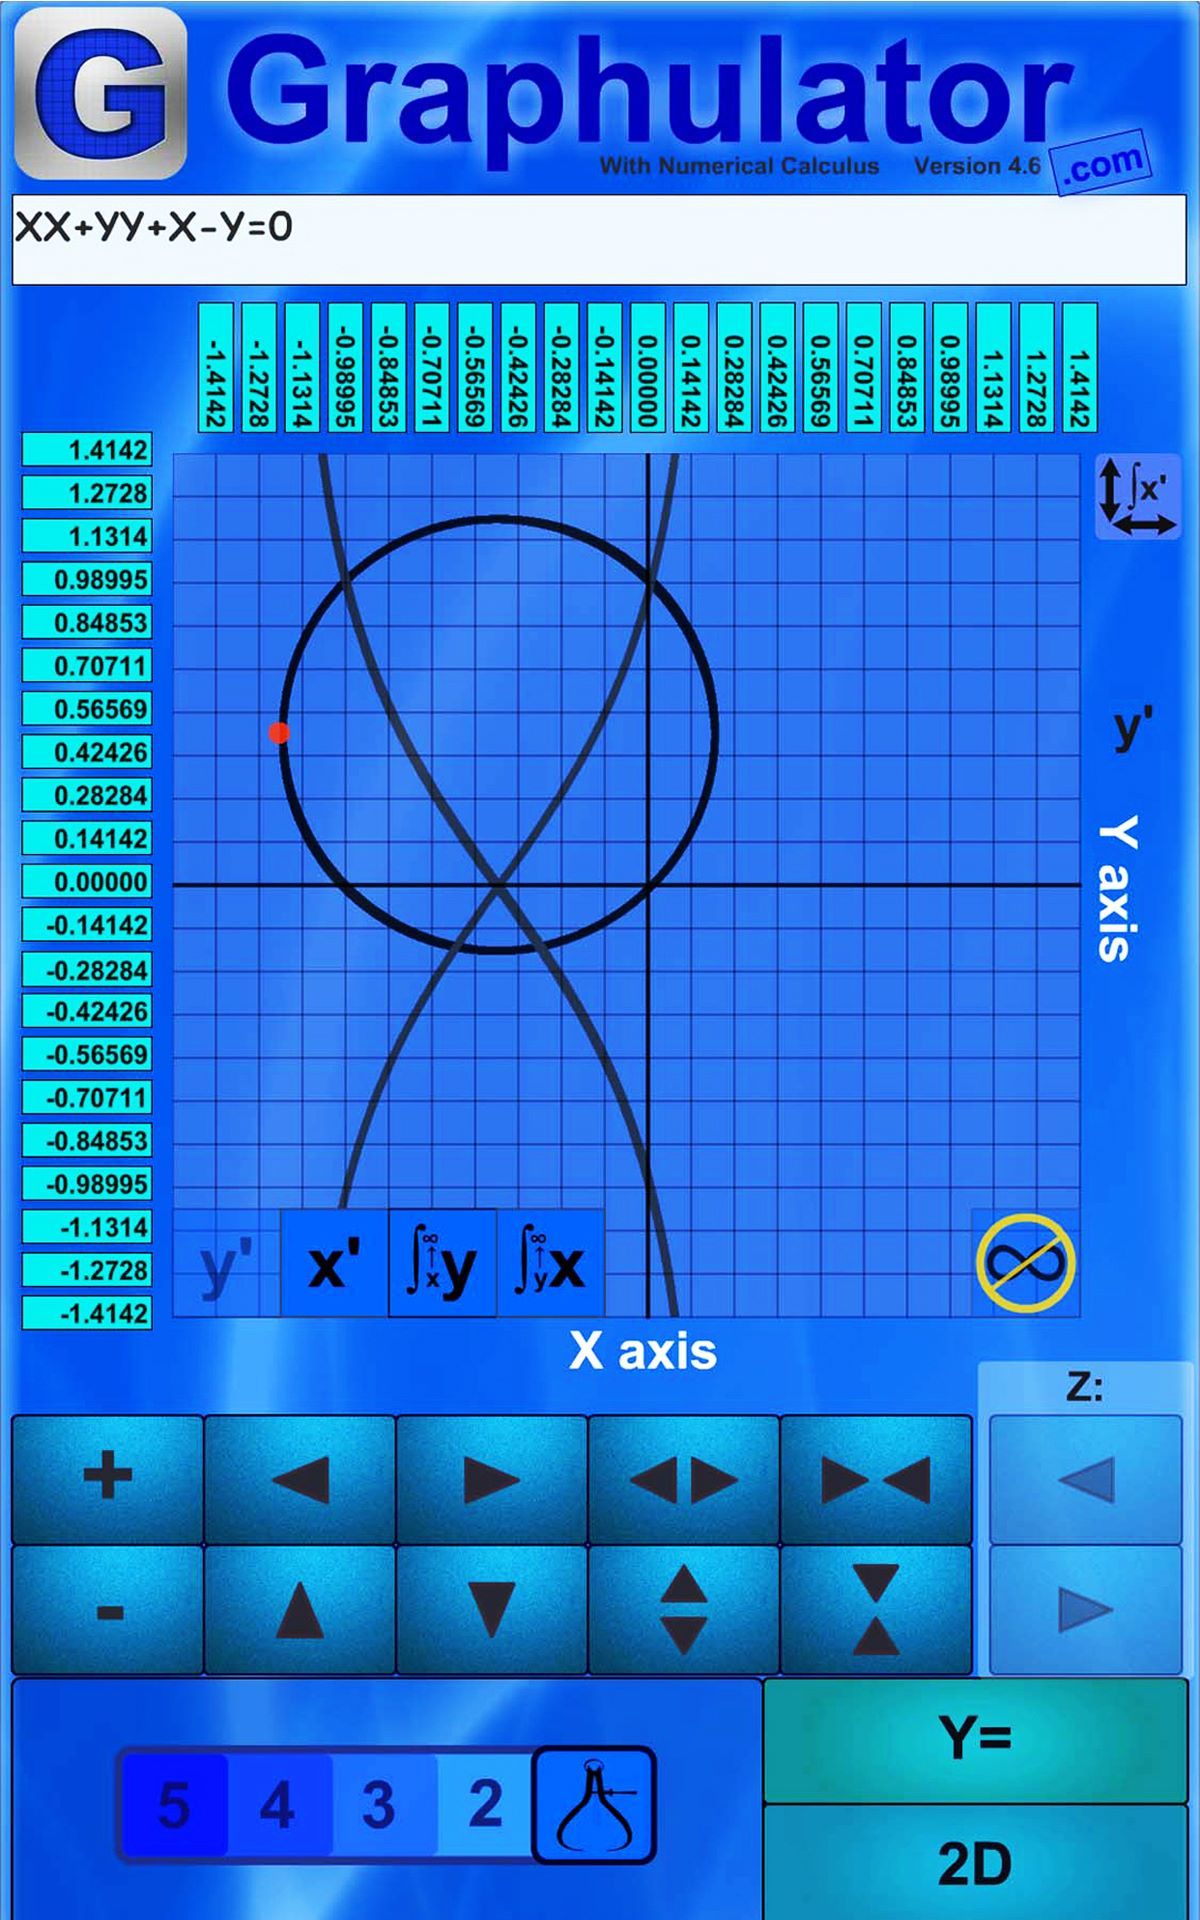 Graphulator - Graphing Calculator Trial